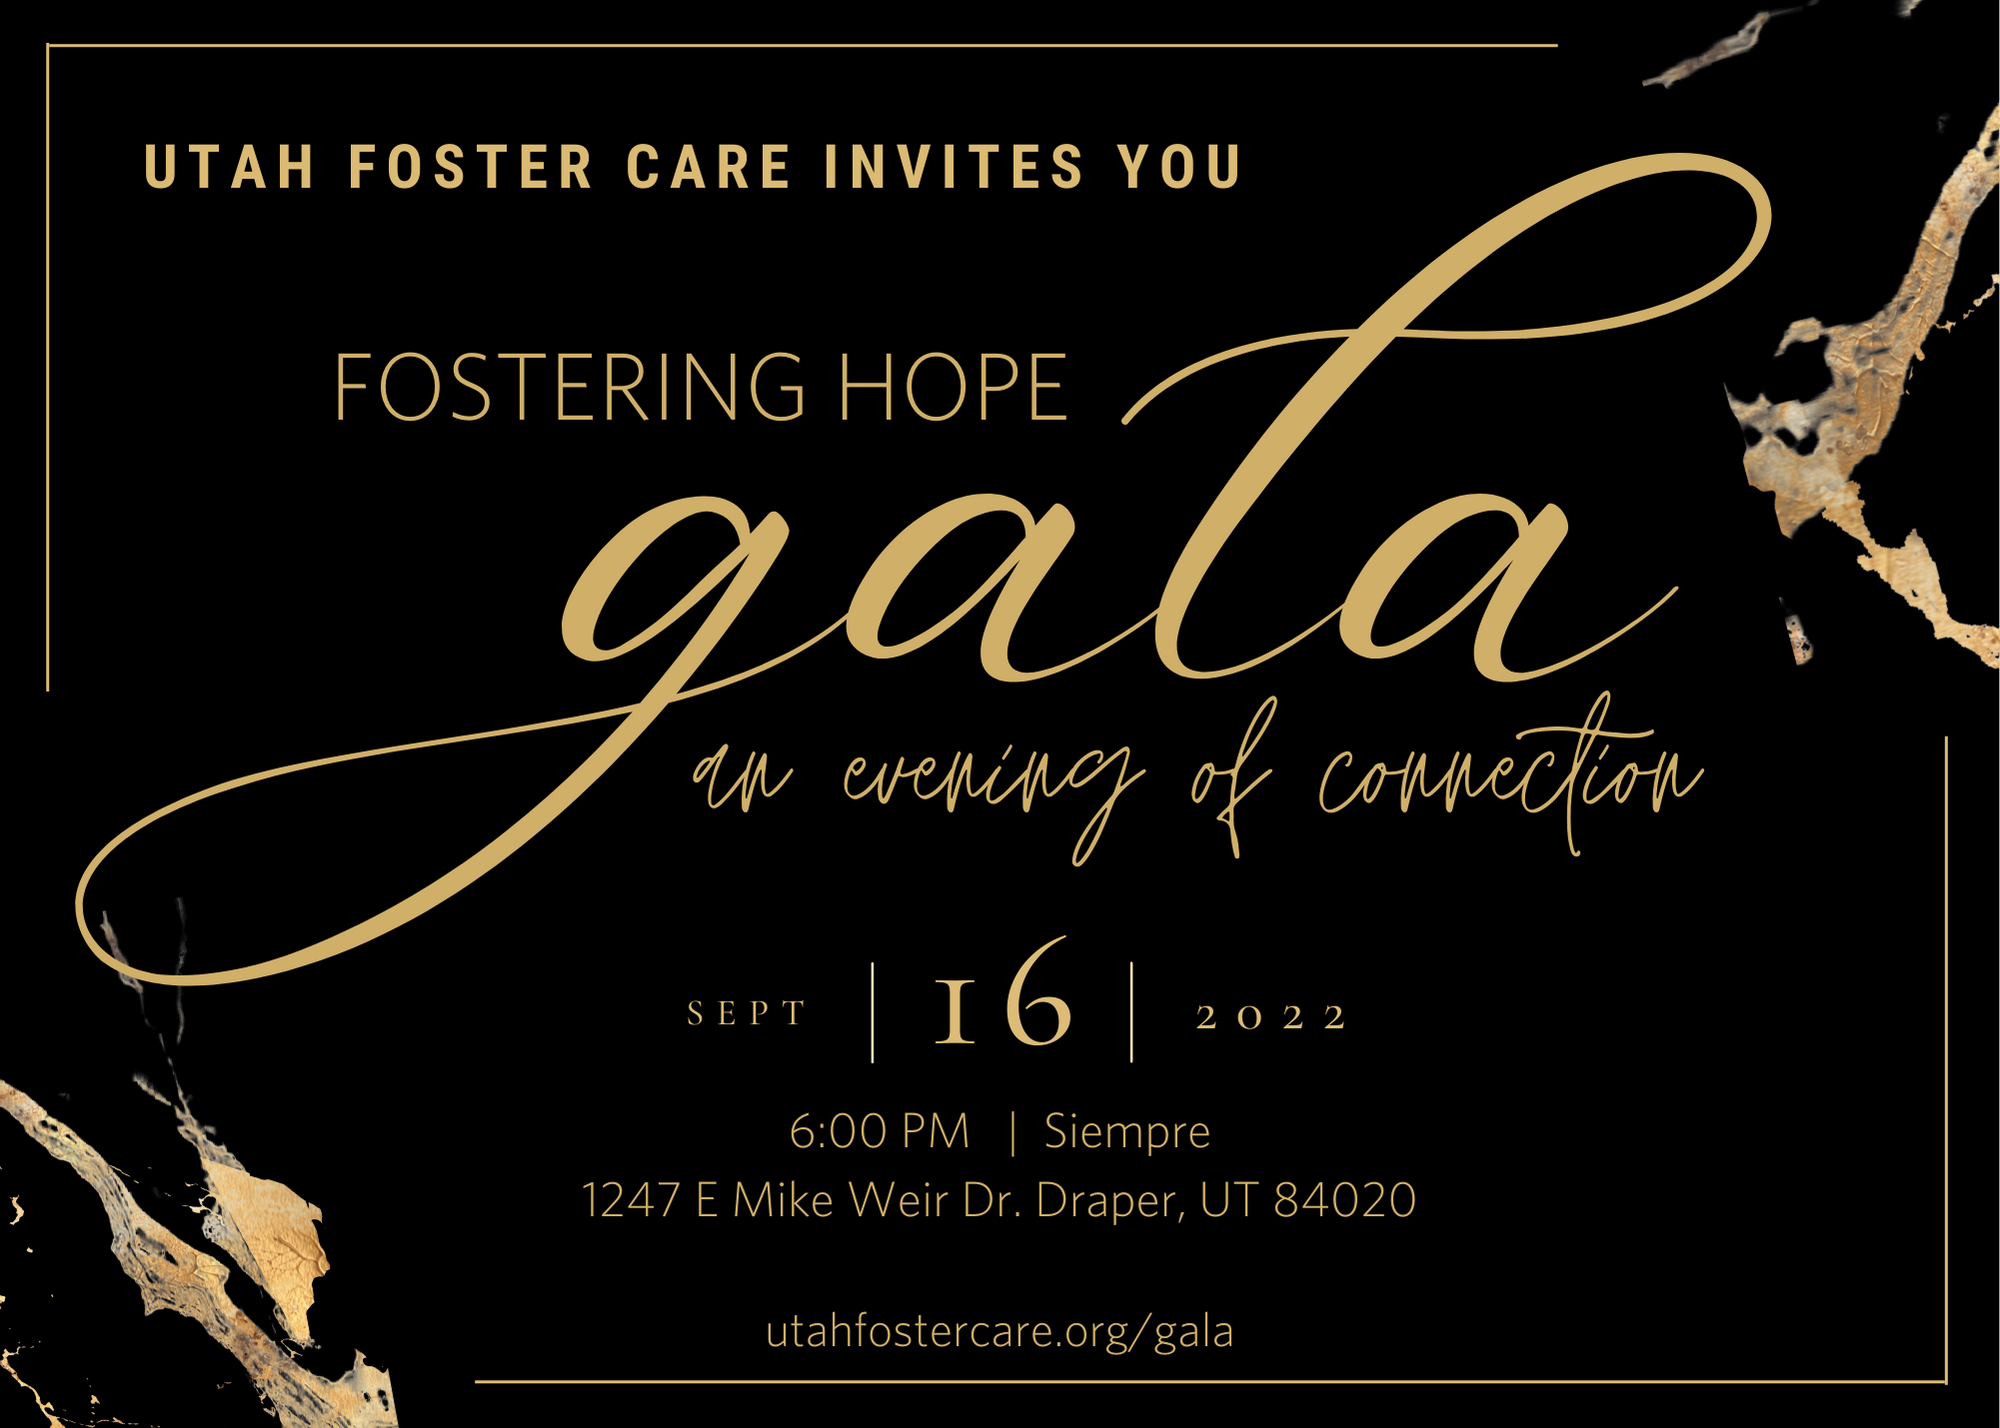 Fostering Hope Gala - An Evening of Connection - Utah Foster Care